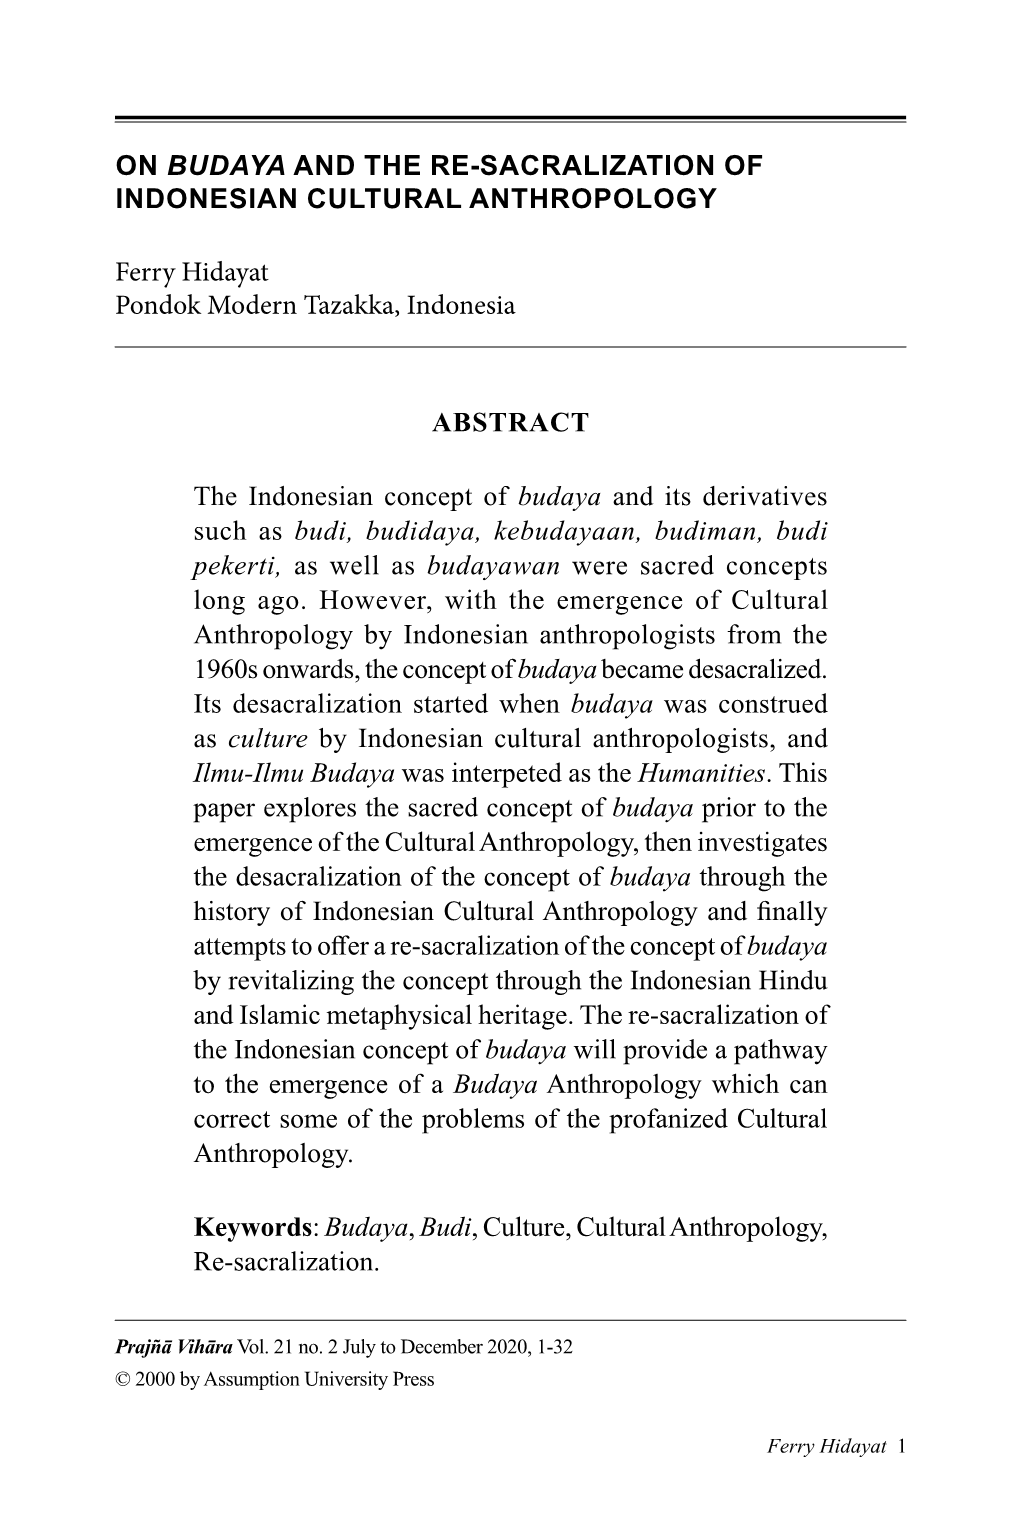 On Budaya and the Re-Sacralization of Indonesian Cultural Anthropology